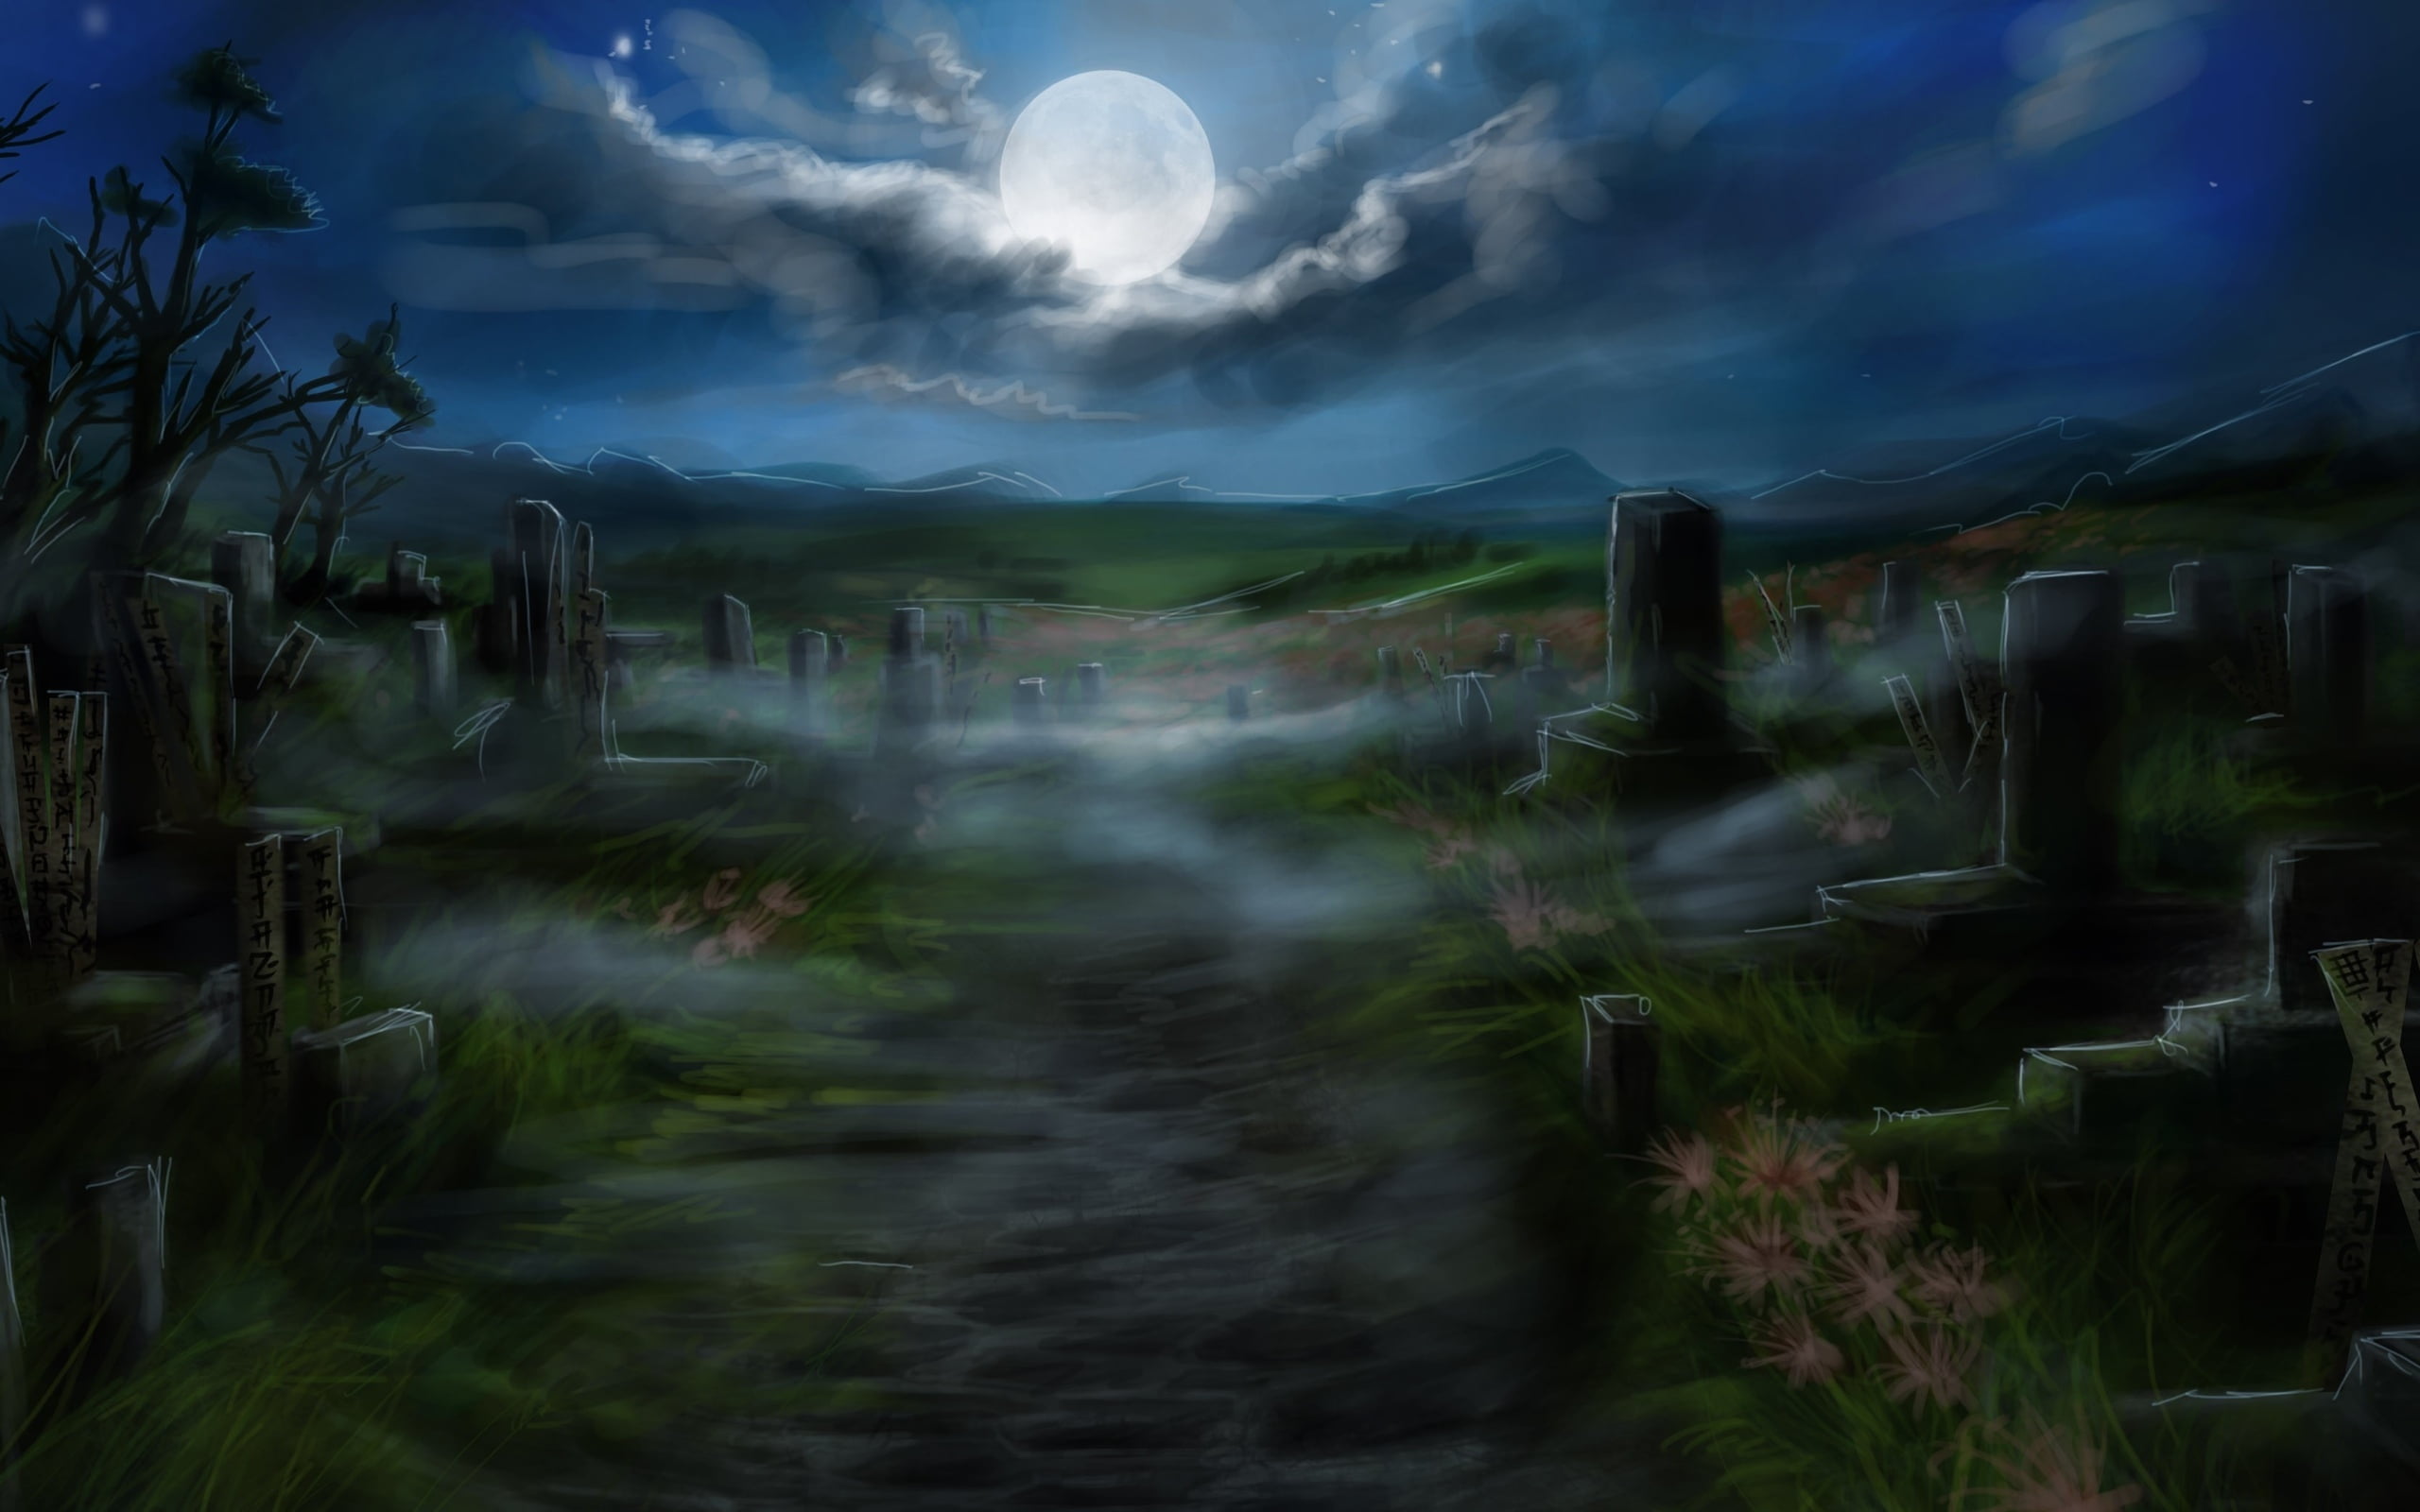 Cemetery painting, night, Moon, clouds, cemetery HD wallpaper ...